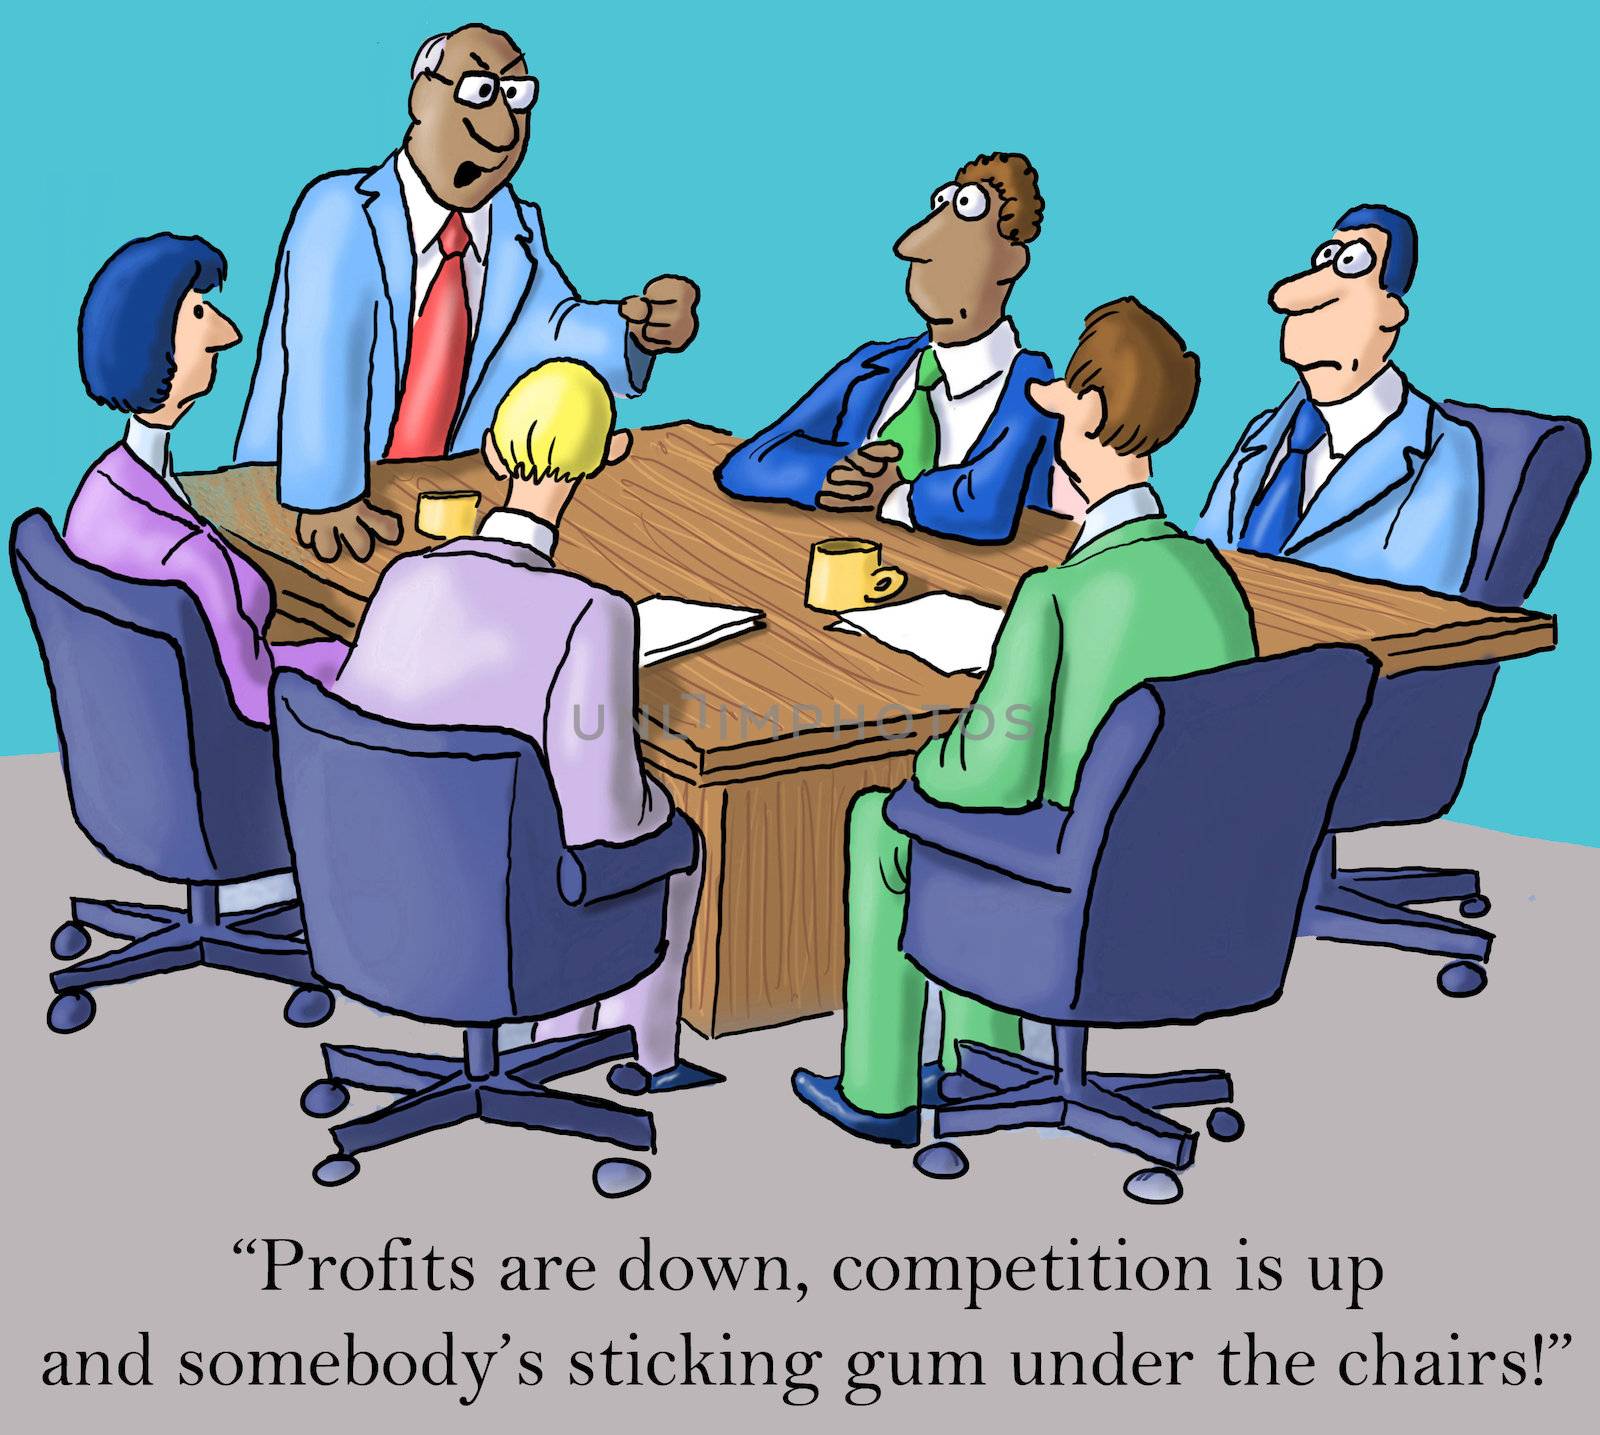 "Profits are down, competition is up and somebody's sticking gum under the chairs."